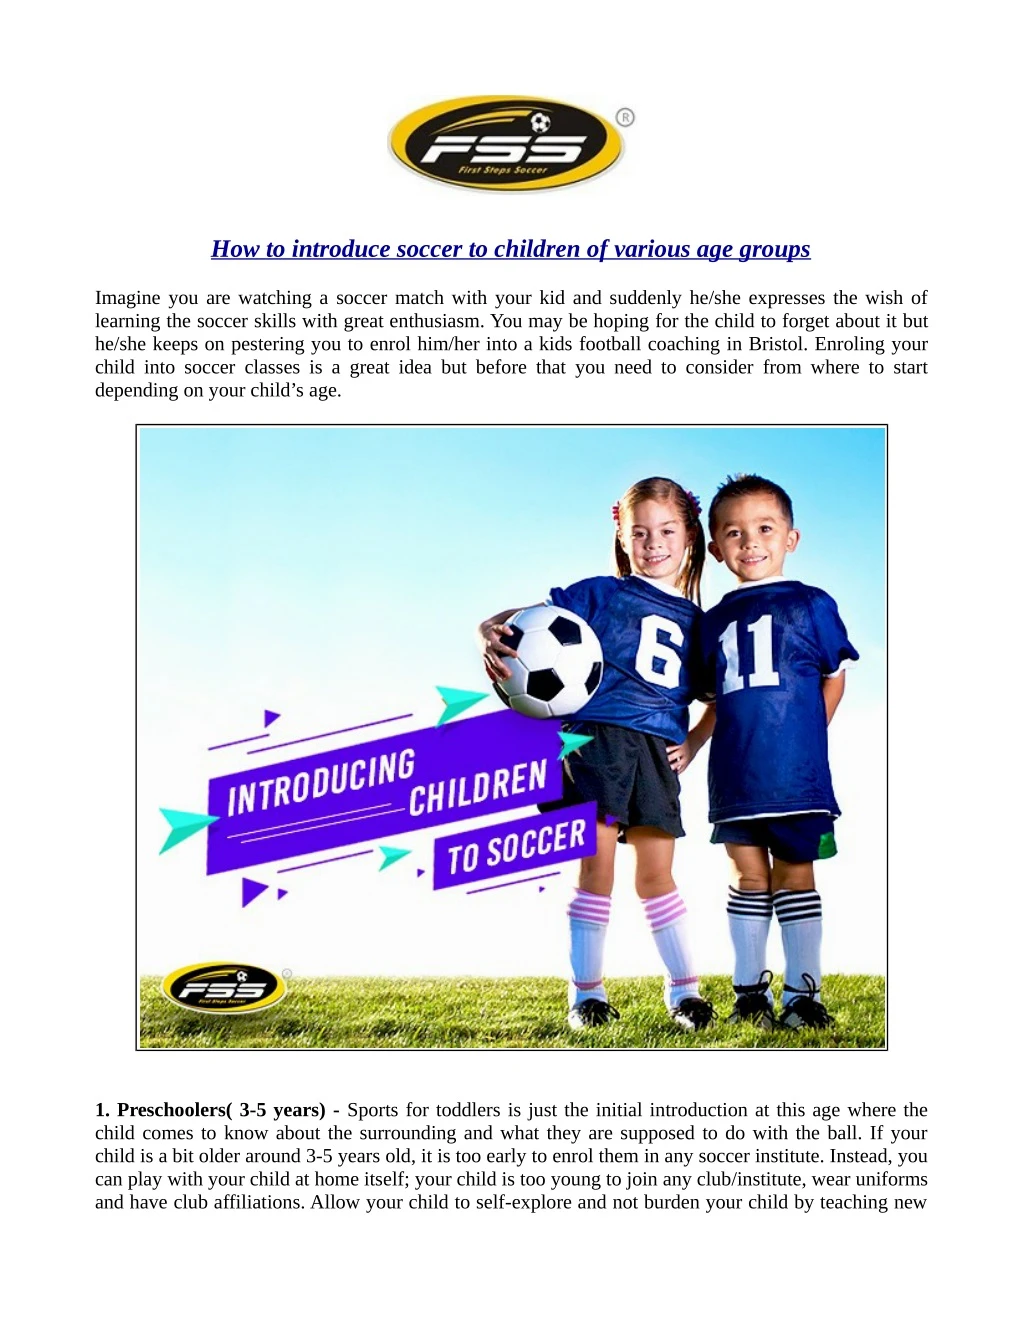 how to introduce soccer to children of various